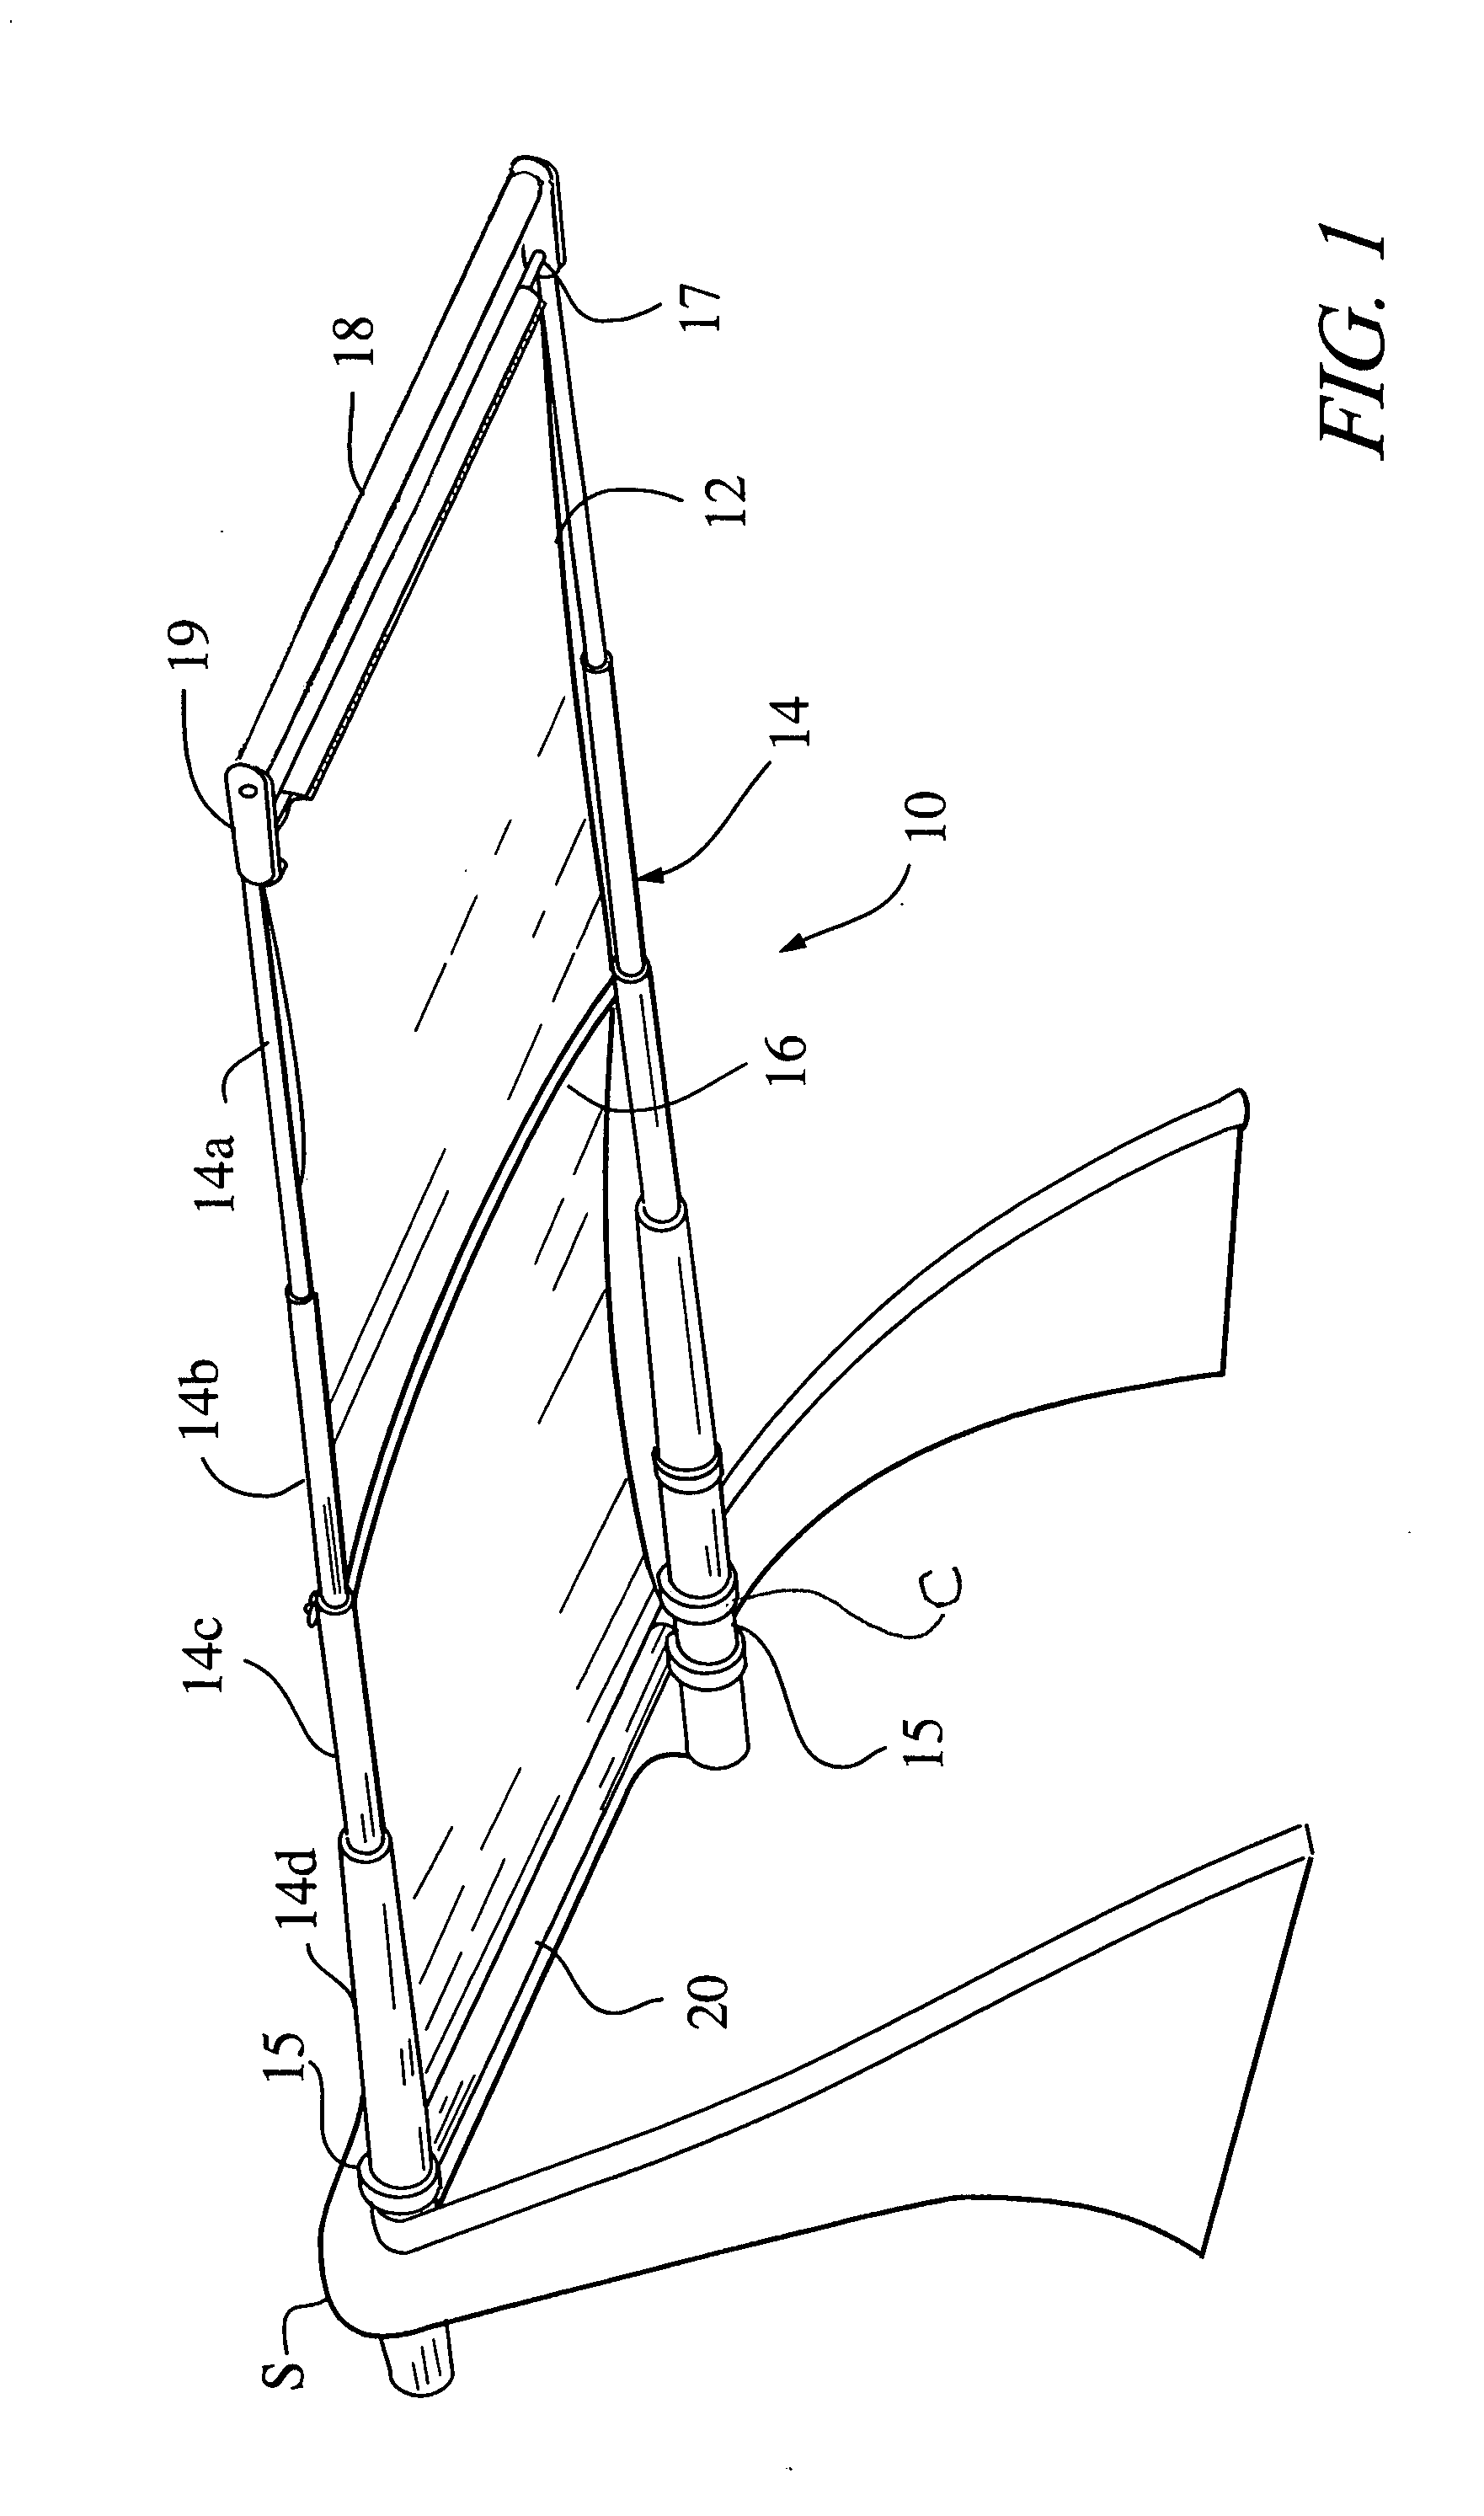 Pullout shade system for boats